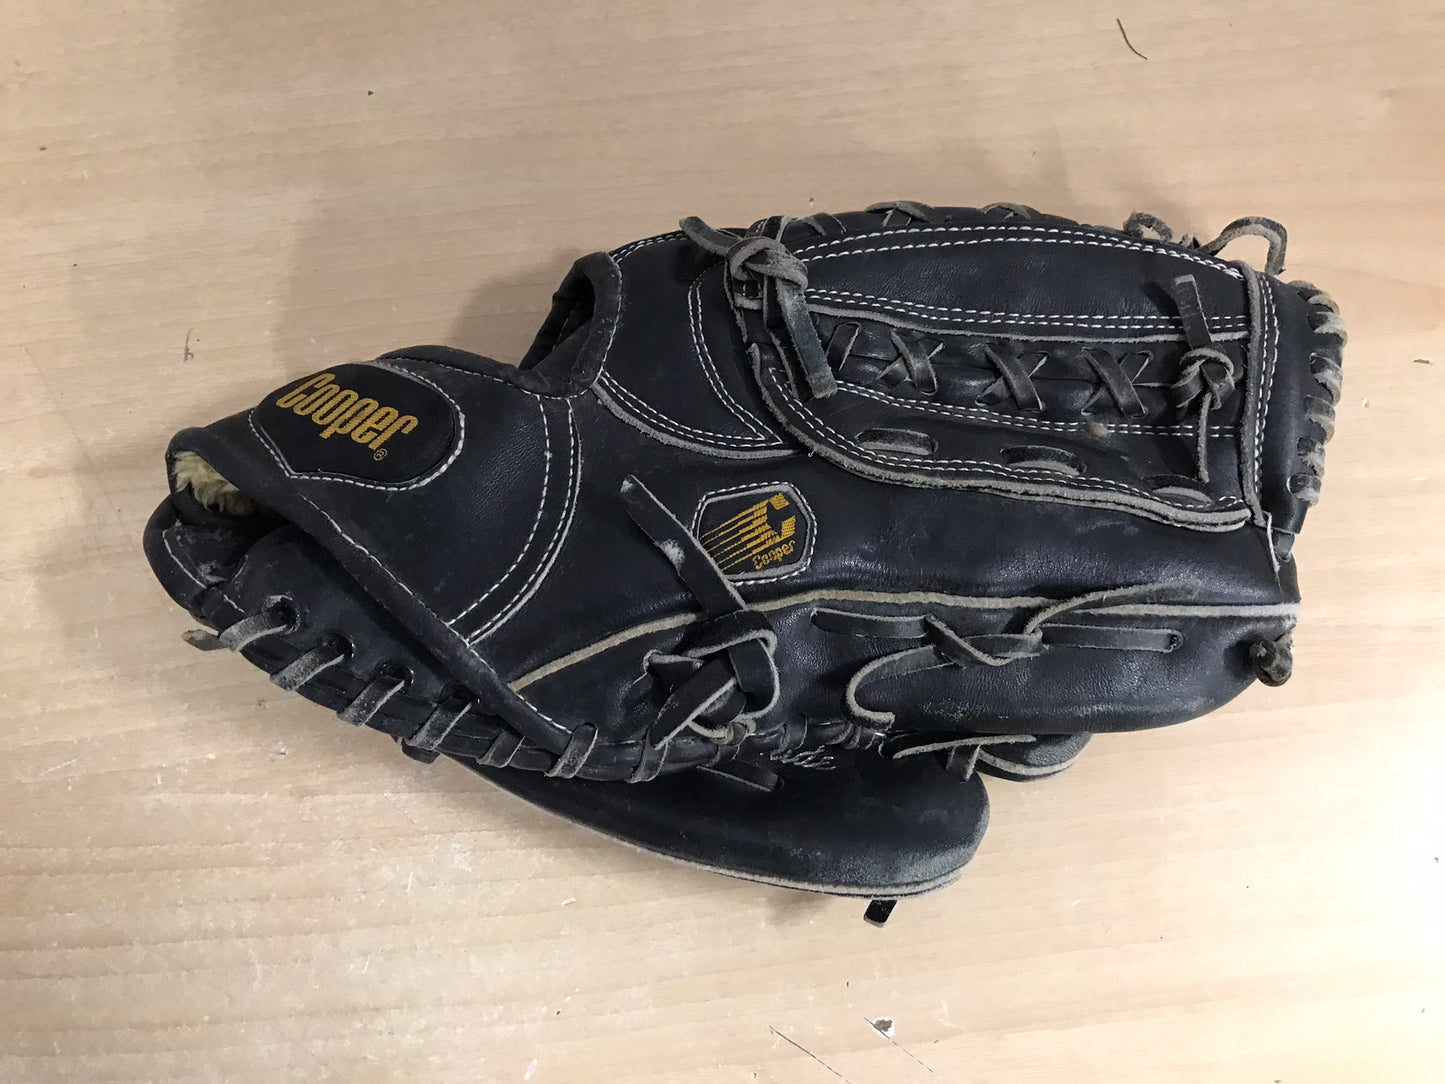 Baseball Glove Adult Size 12 inch Cooper Leather Black Fits on Left Hand